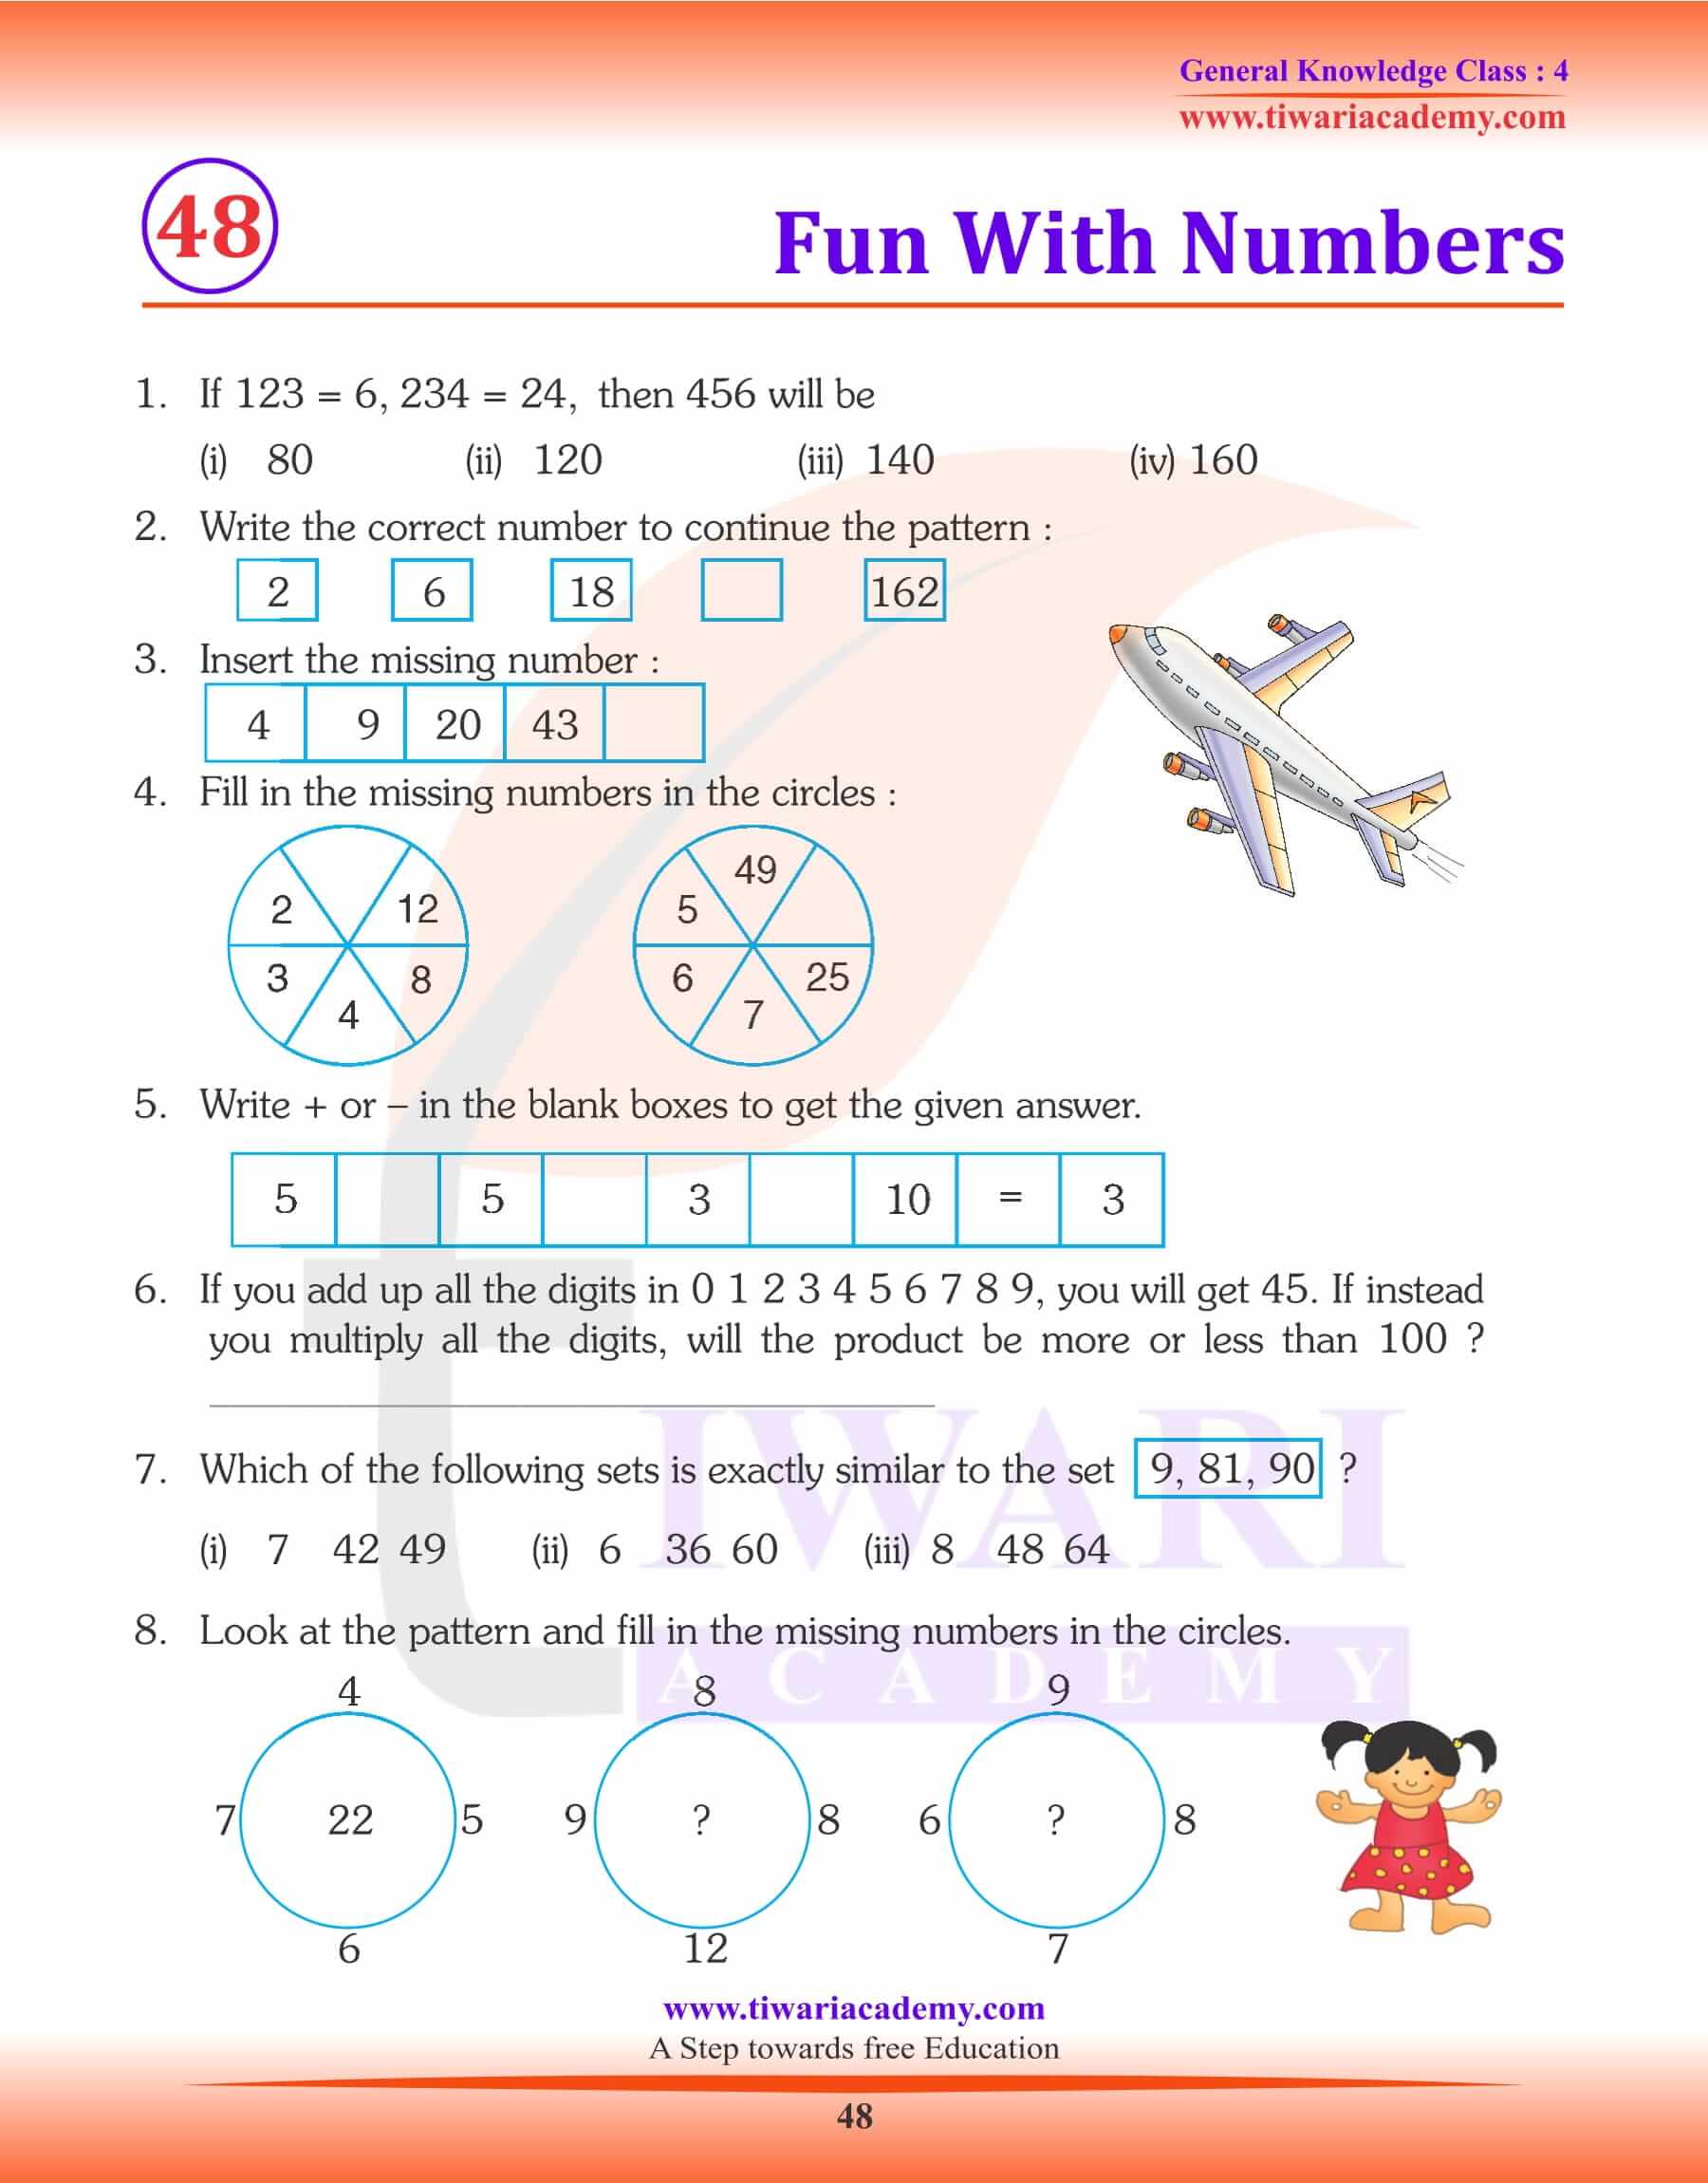 Fun with Numbers